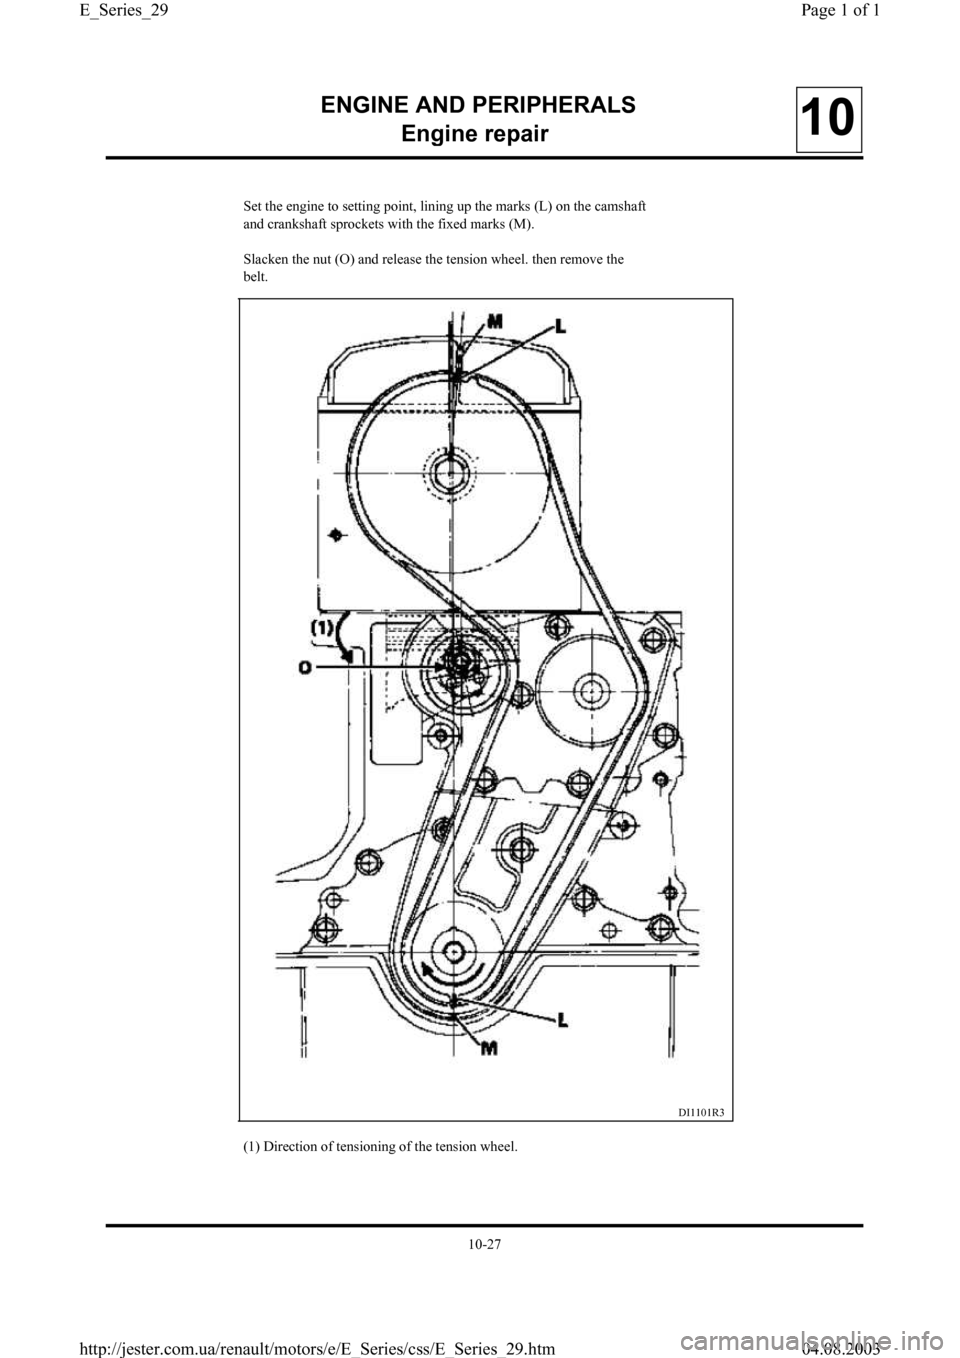 RENAULT CLIO 1997 X57 / 1.G Petrol Engines Workshop Manual ENGINE AND PERIPHERALS
En
gine repair10
DI1101R3
(1) Direction of tensioning of the tension wheel. Set the en
gine to setting point, lining up the marks (L) on the camshaft
and crankshaft sprockets wi